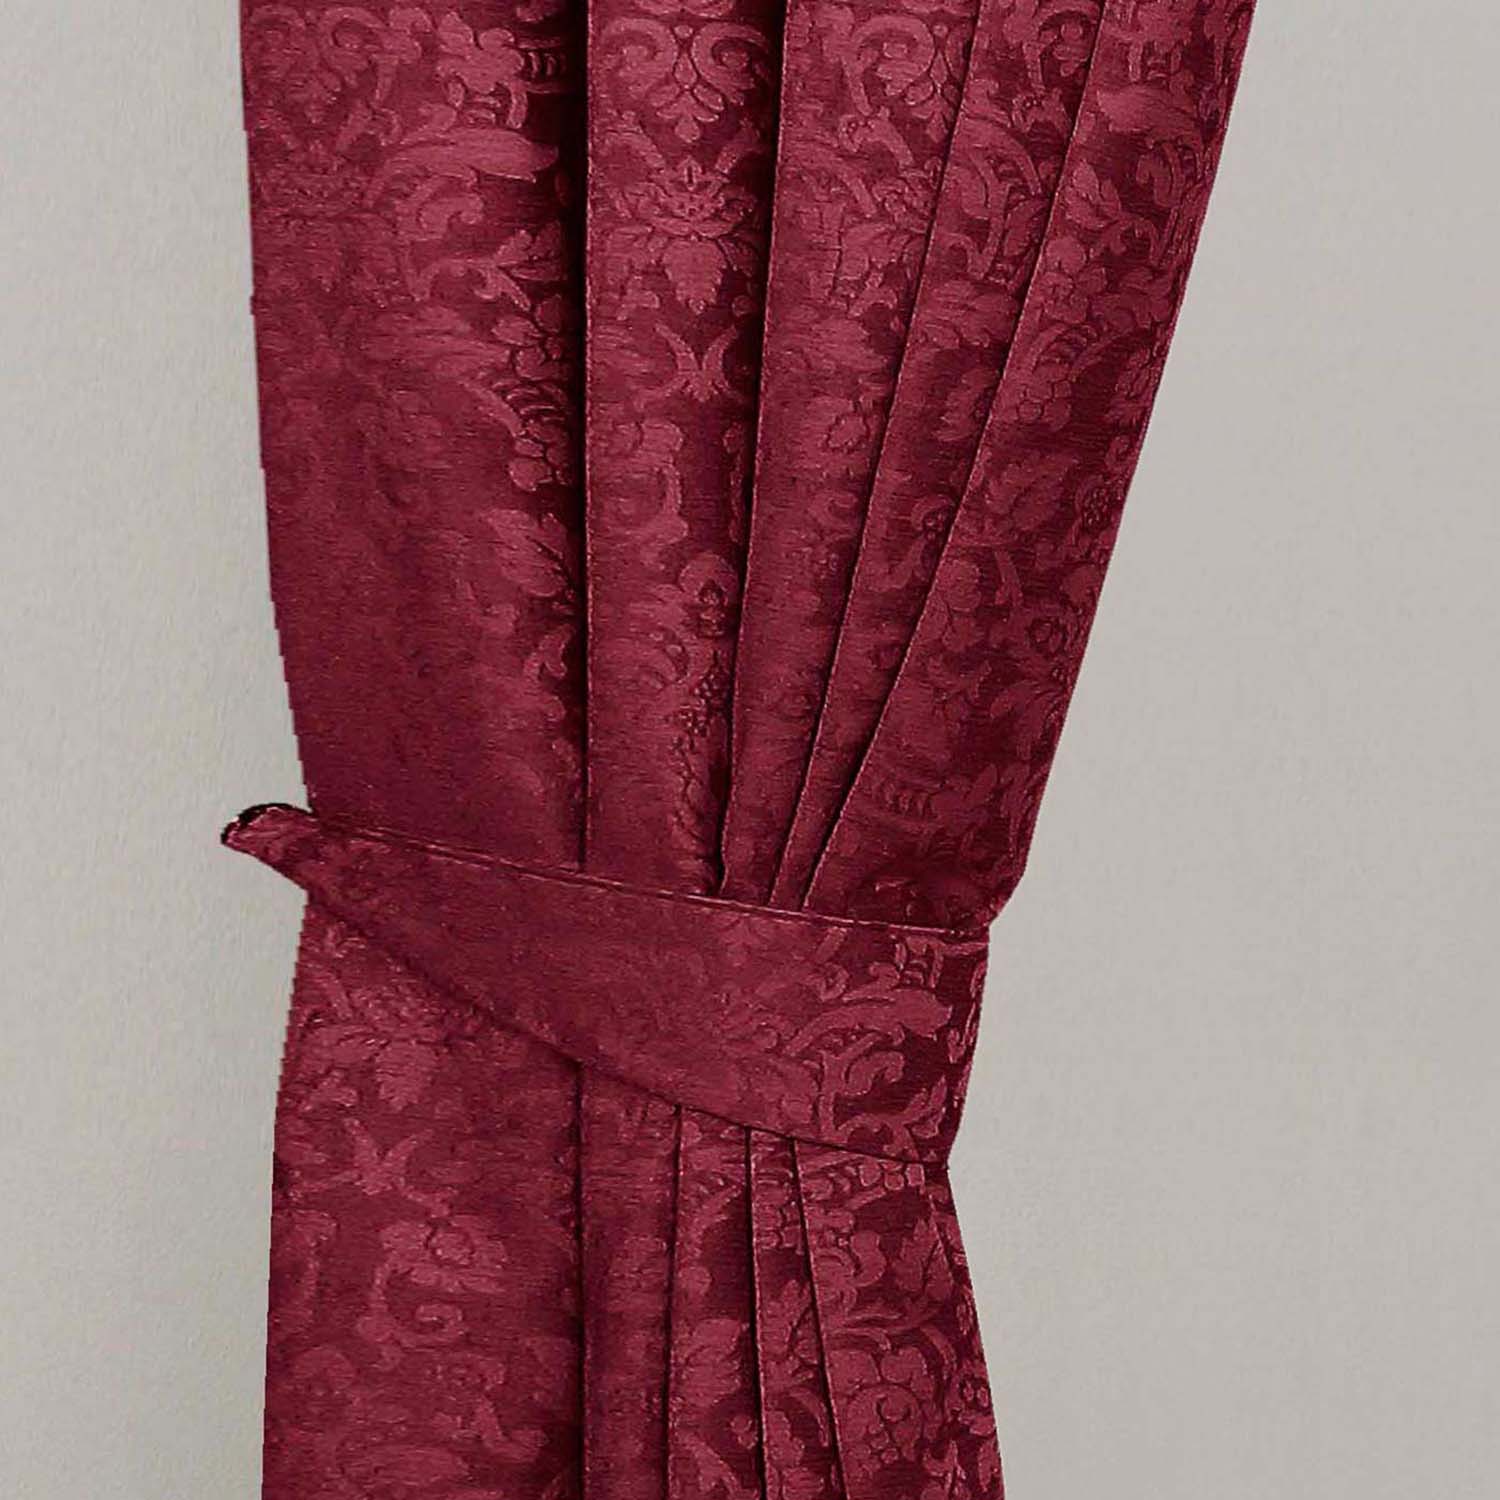 Homescapes Wine Red Velvet Jacquard Curtains Tie Backs Pair